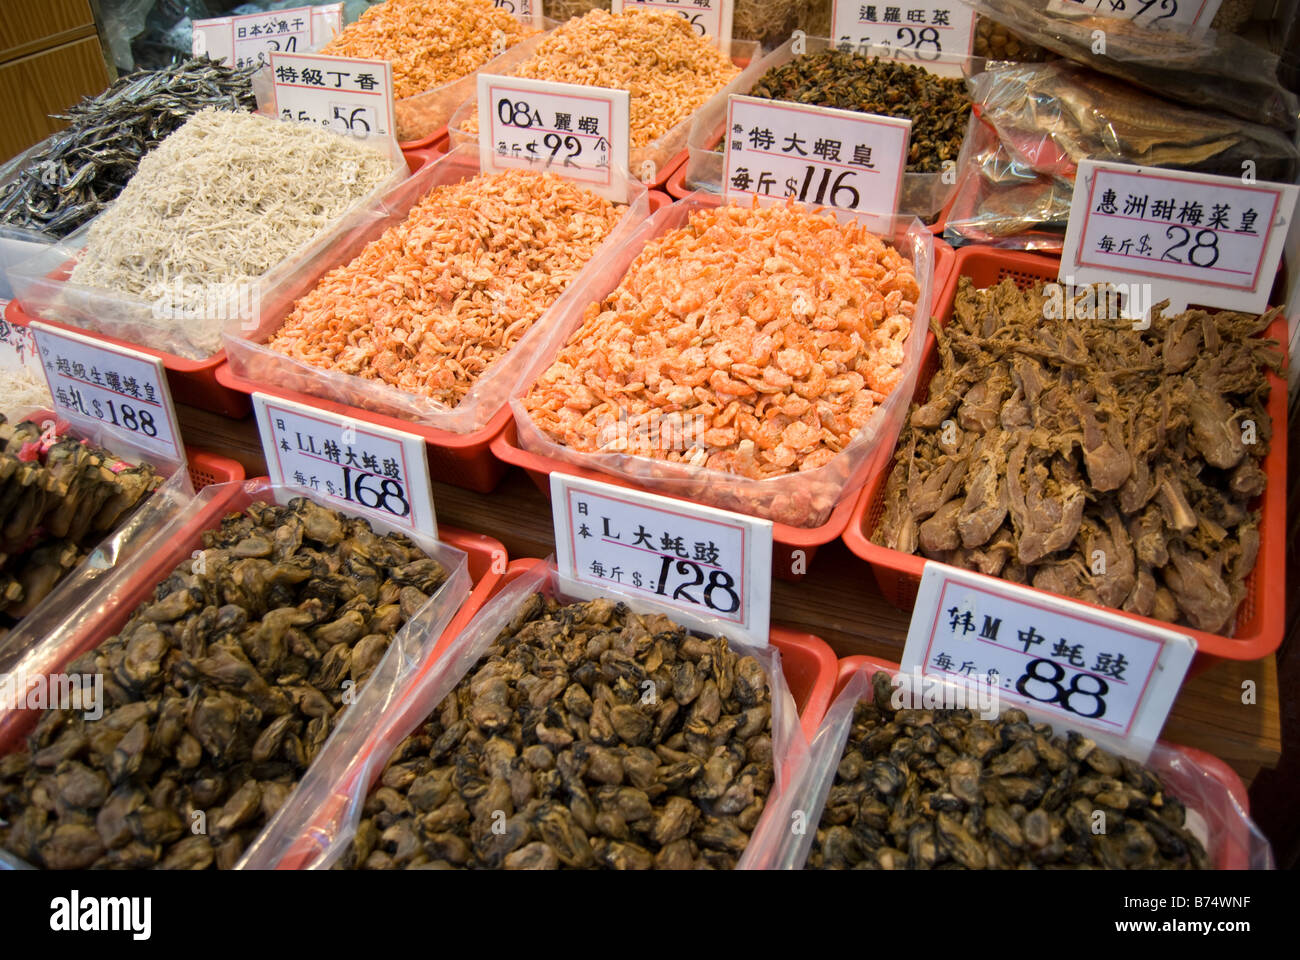 Pesce essiccato display, Des Voeux Road West, Sai Ying Pun, Victoria Harbour, Isola di Hong Kong, Hong Kong, Cina Foto Stock